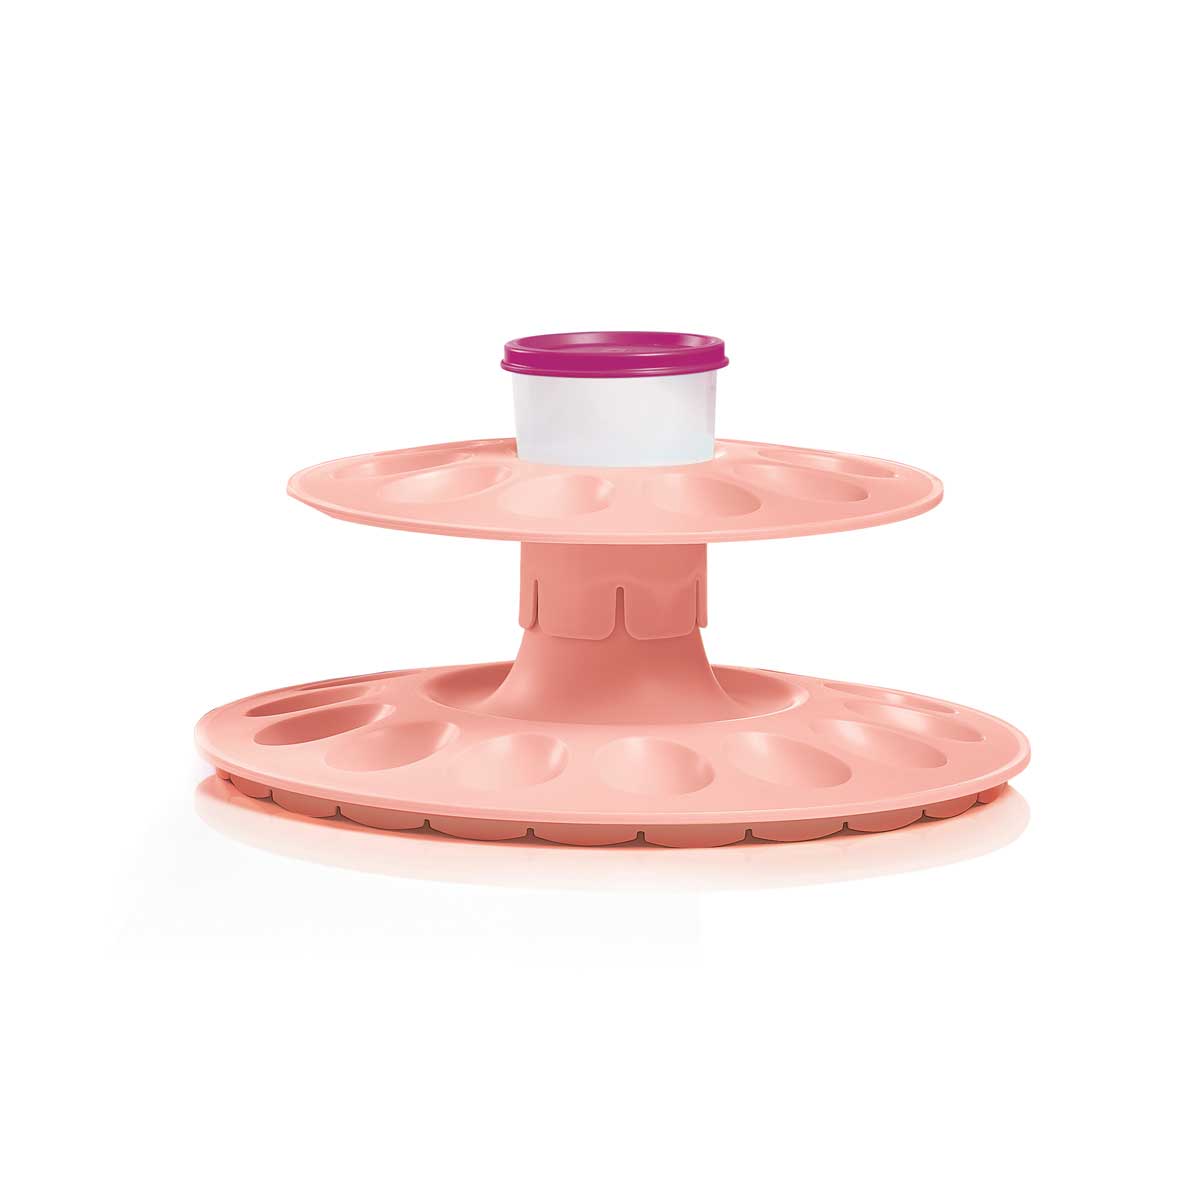 Egg-ceptional® Server Set and Snack Cup